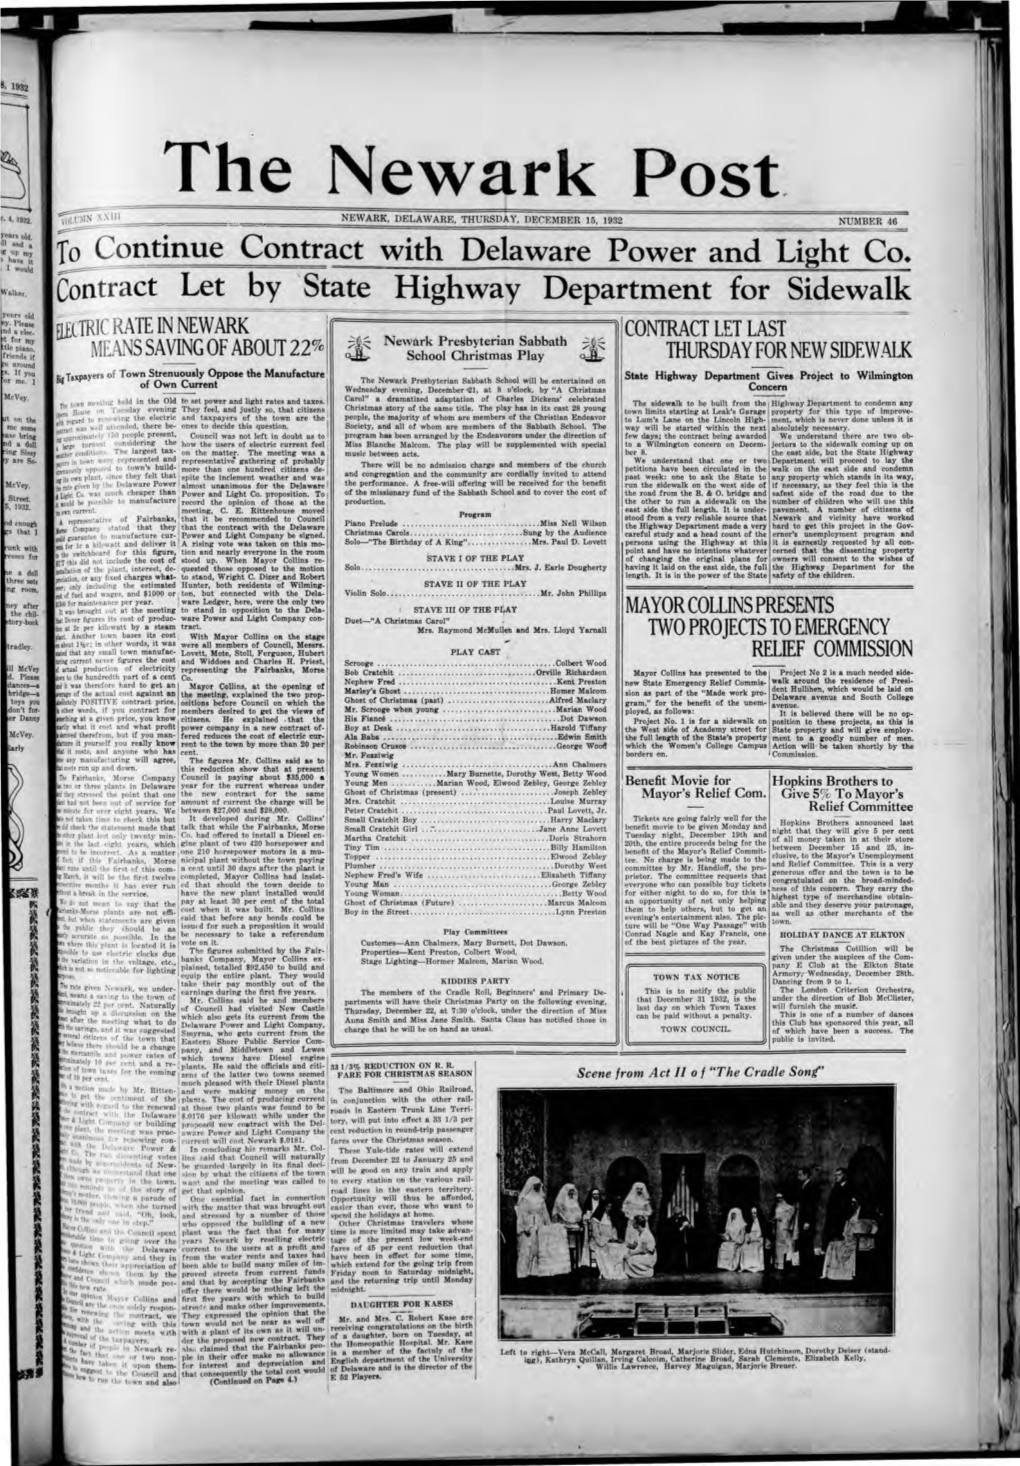 The Newark Post. ~.U~I X=·.\=·[=II====::7::=====' NEWARK, DELAWARE, THURSDAY, DECEMBER 15, 1932 NUMBER 46 ~ to Continue Contract with Delaw-Are Power and Light Co